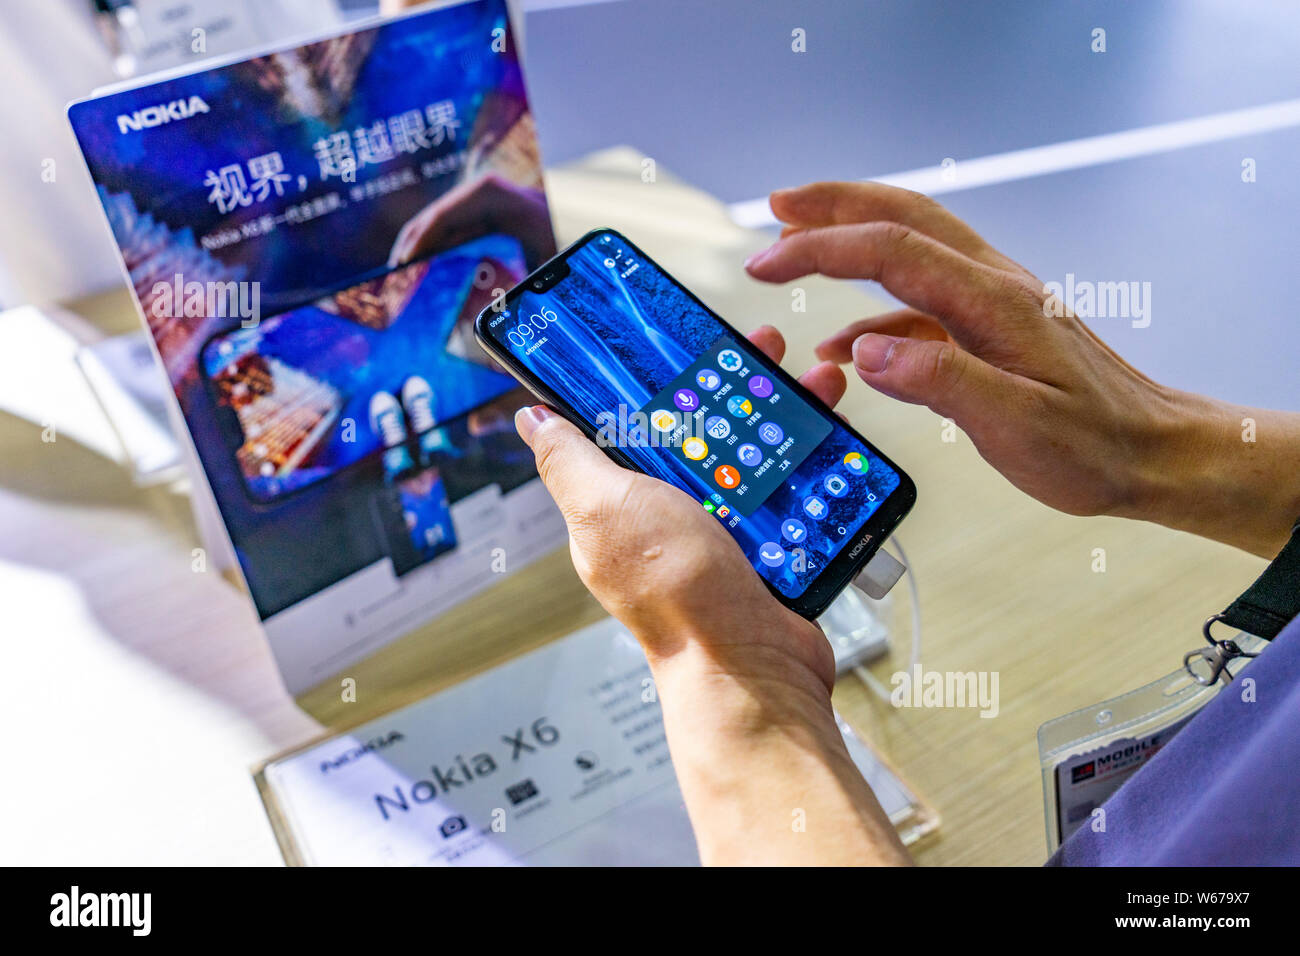 --FILE--A visitor tries out a Nokia X6 during the 2018 Mobile World Congress (MWC) in Shanghai, China, 29 June 2018.   Nokia Oyj and China Mobile Ltd. Stock Photo